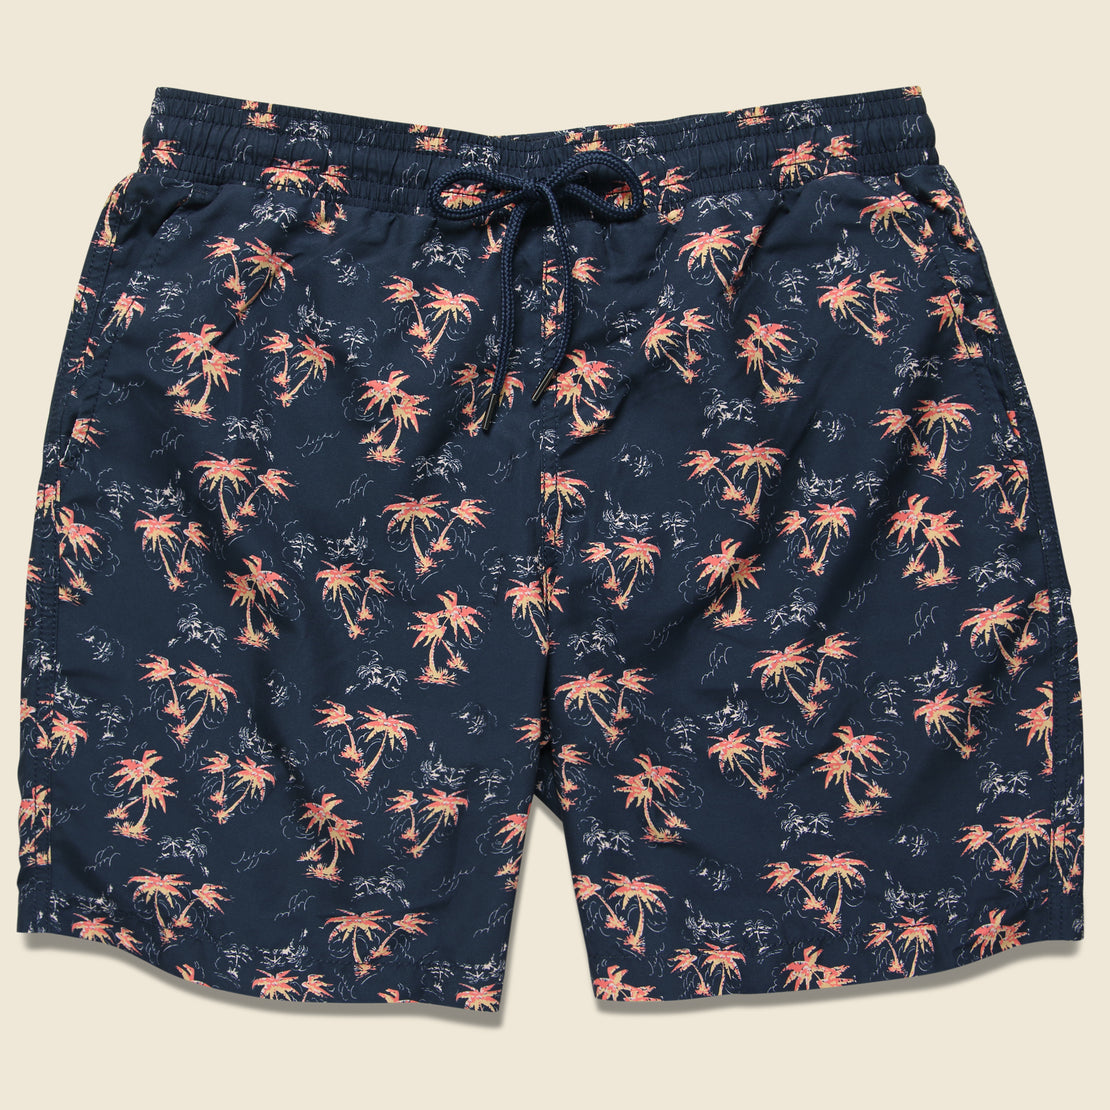 Grayers Burning Palm Swim Trunk - Carbon Spice Coral